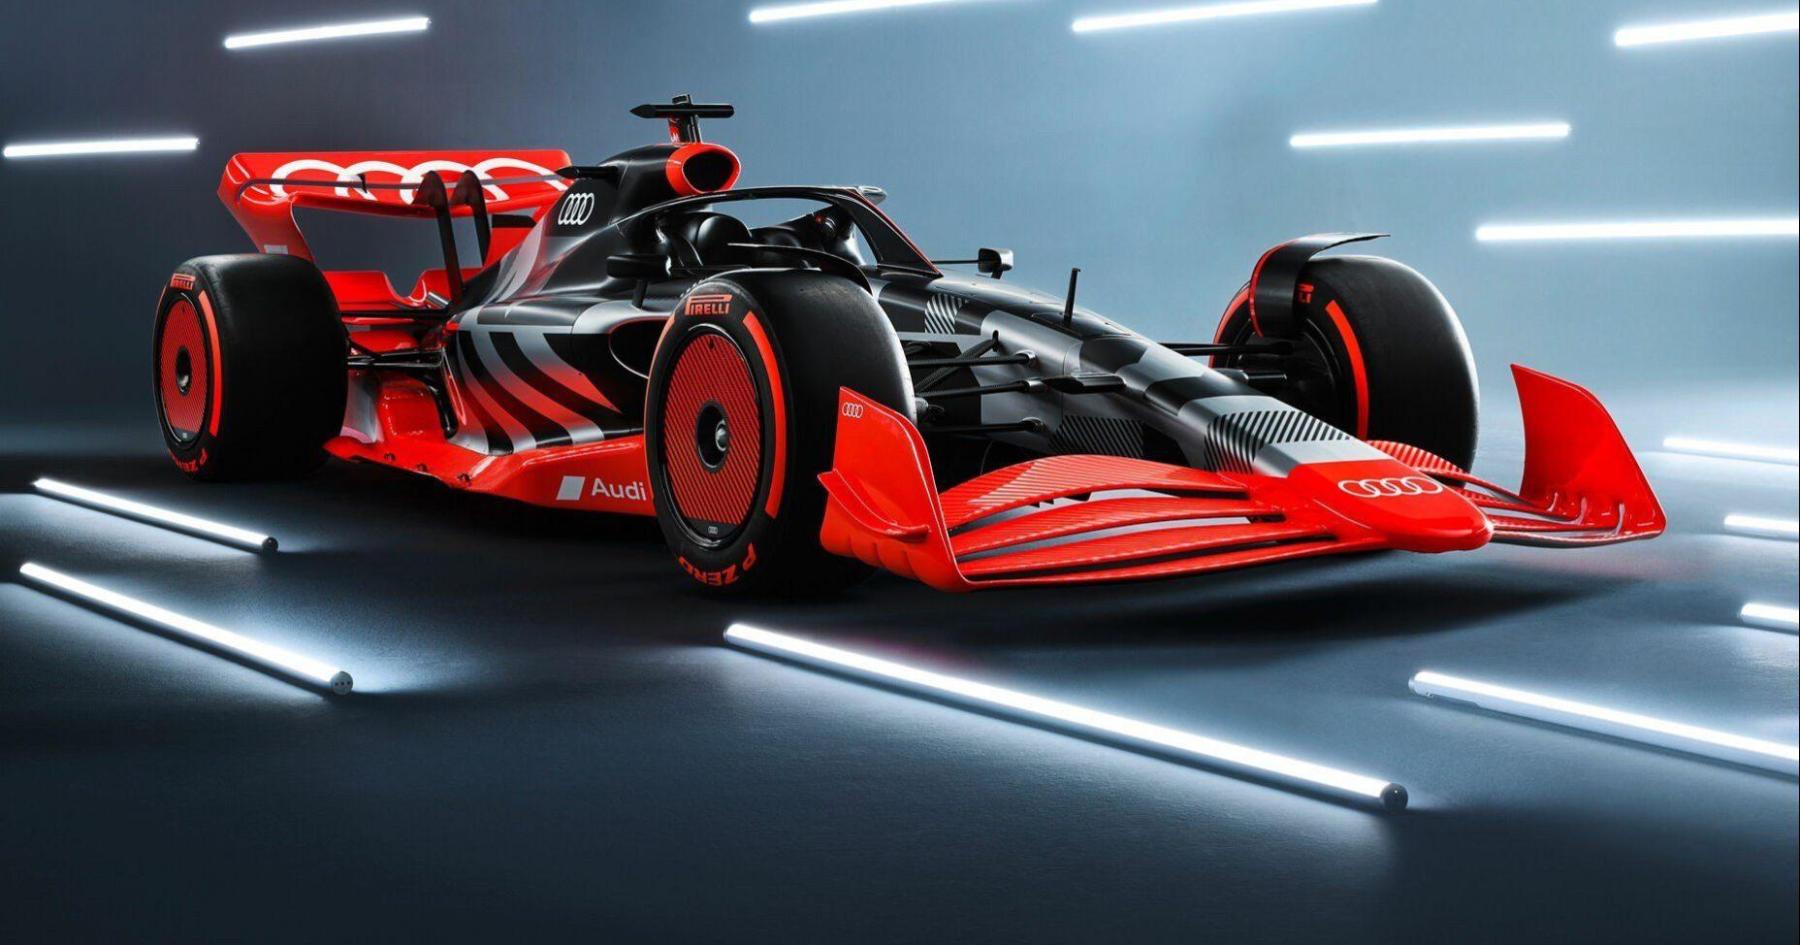 Revving Up Excitement: Audi F1 Aspirations Under the Microscope in Comparison to Red Bull